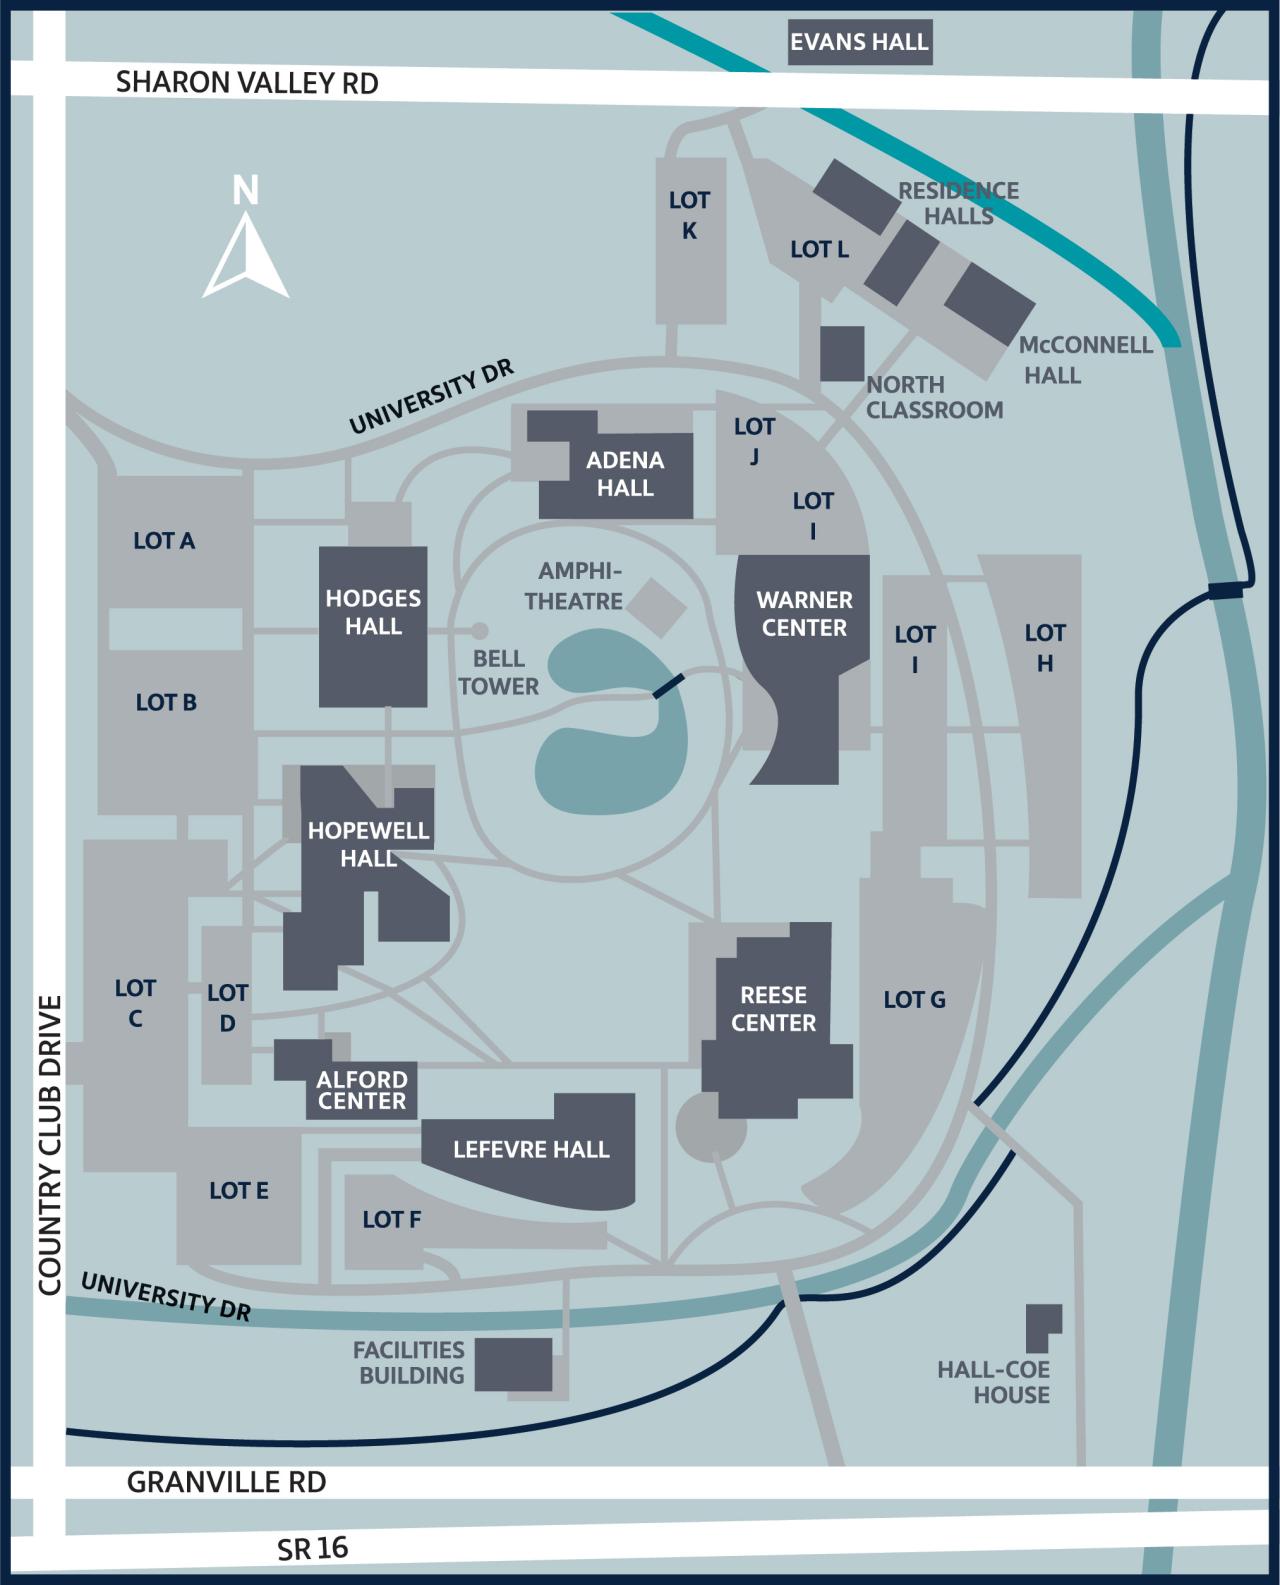 An illustration showing the location of each building. parking lot and road on the campus.